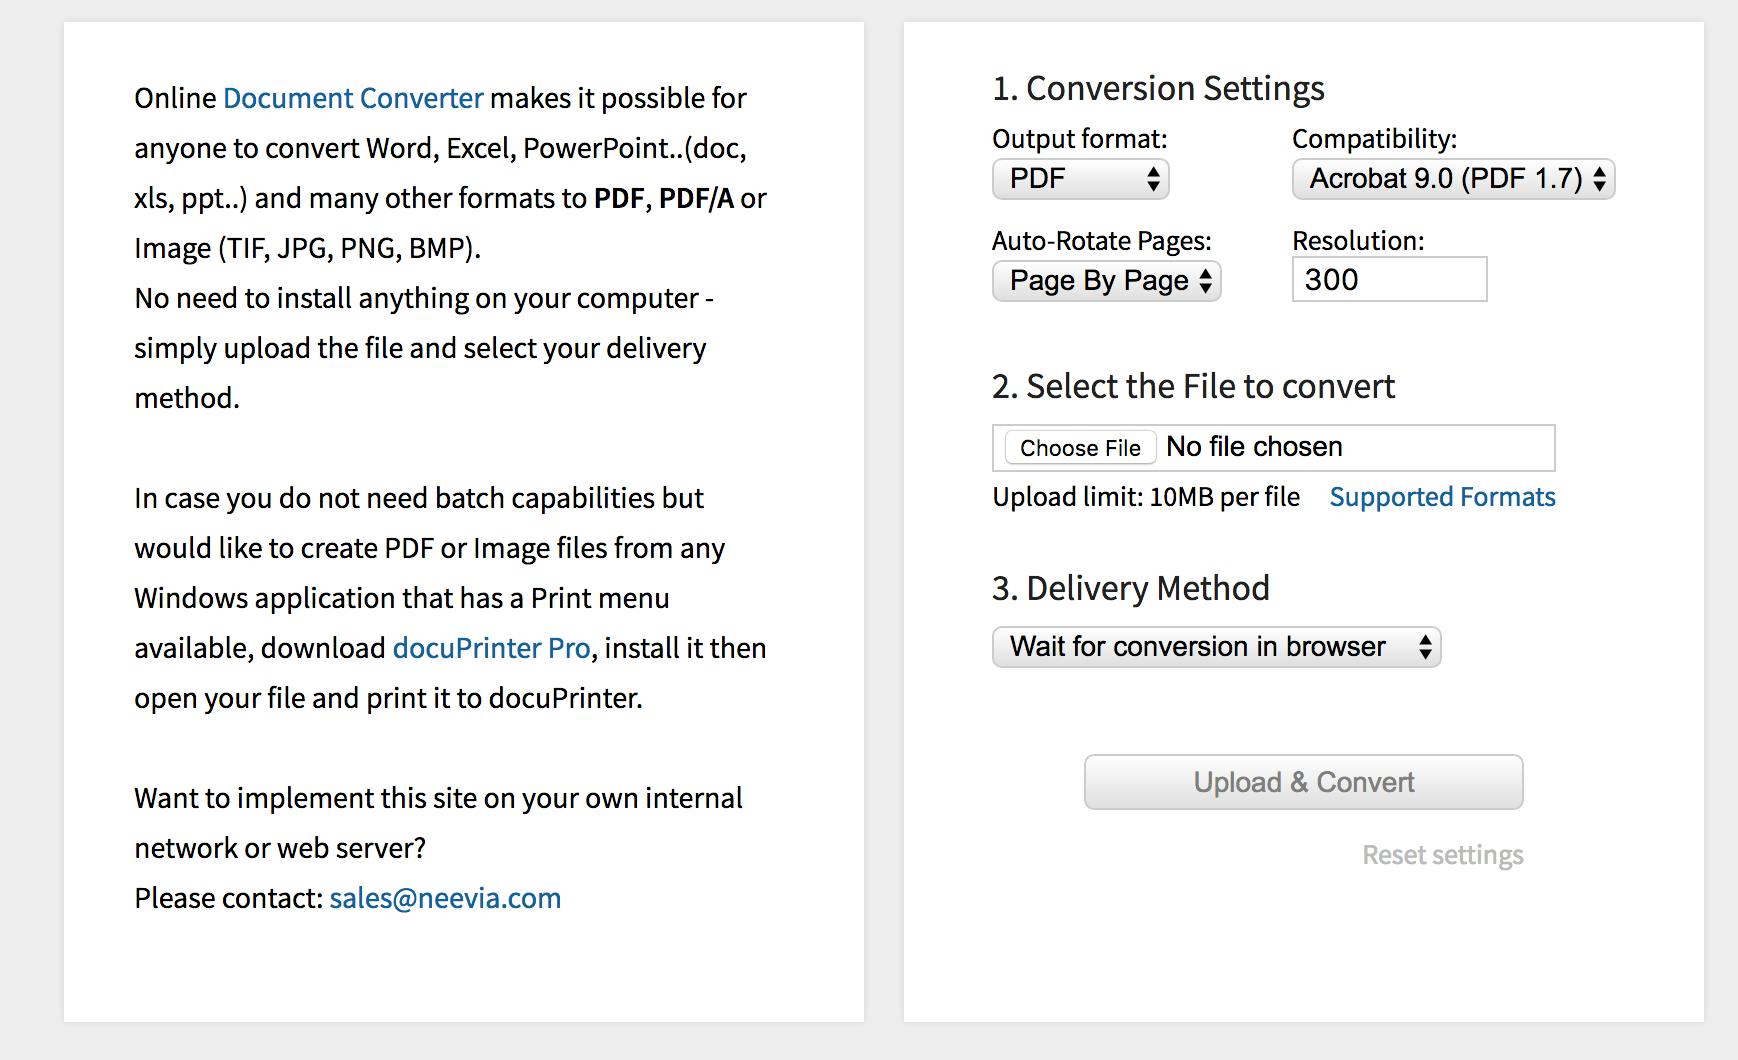 How to convert document to PDF